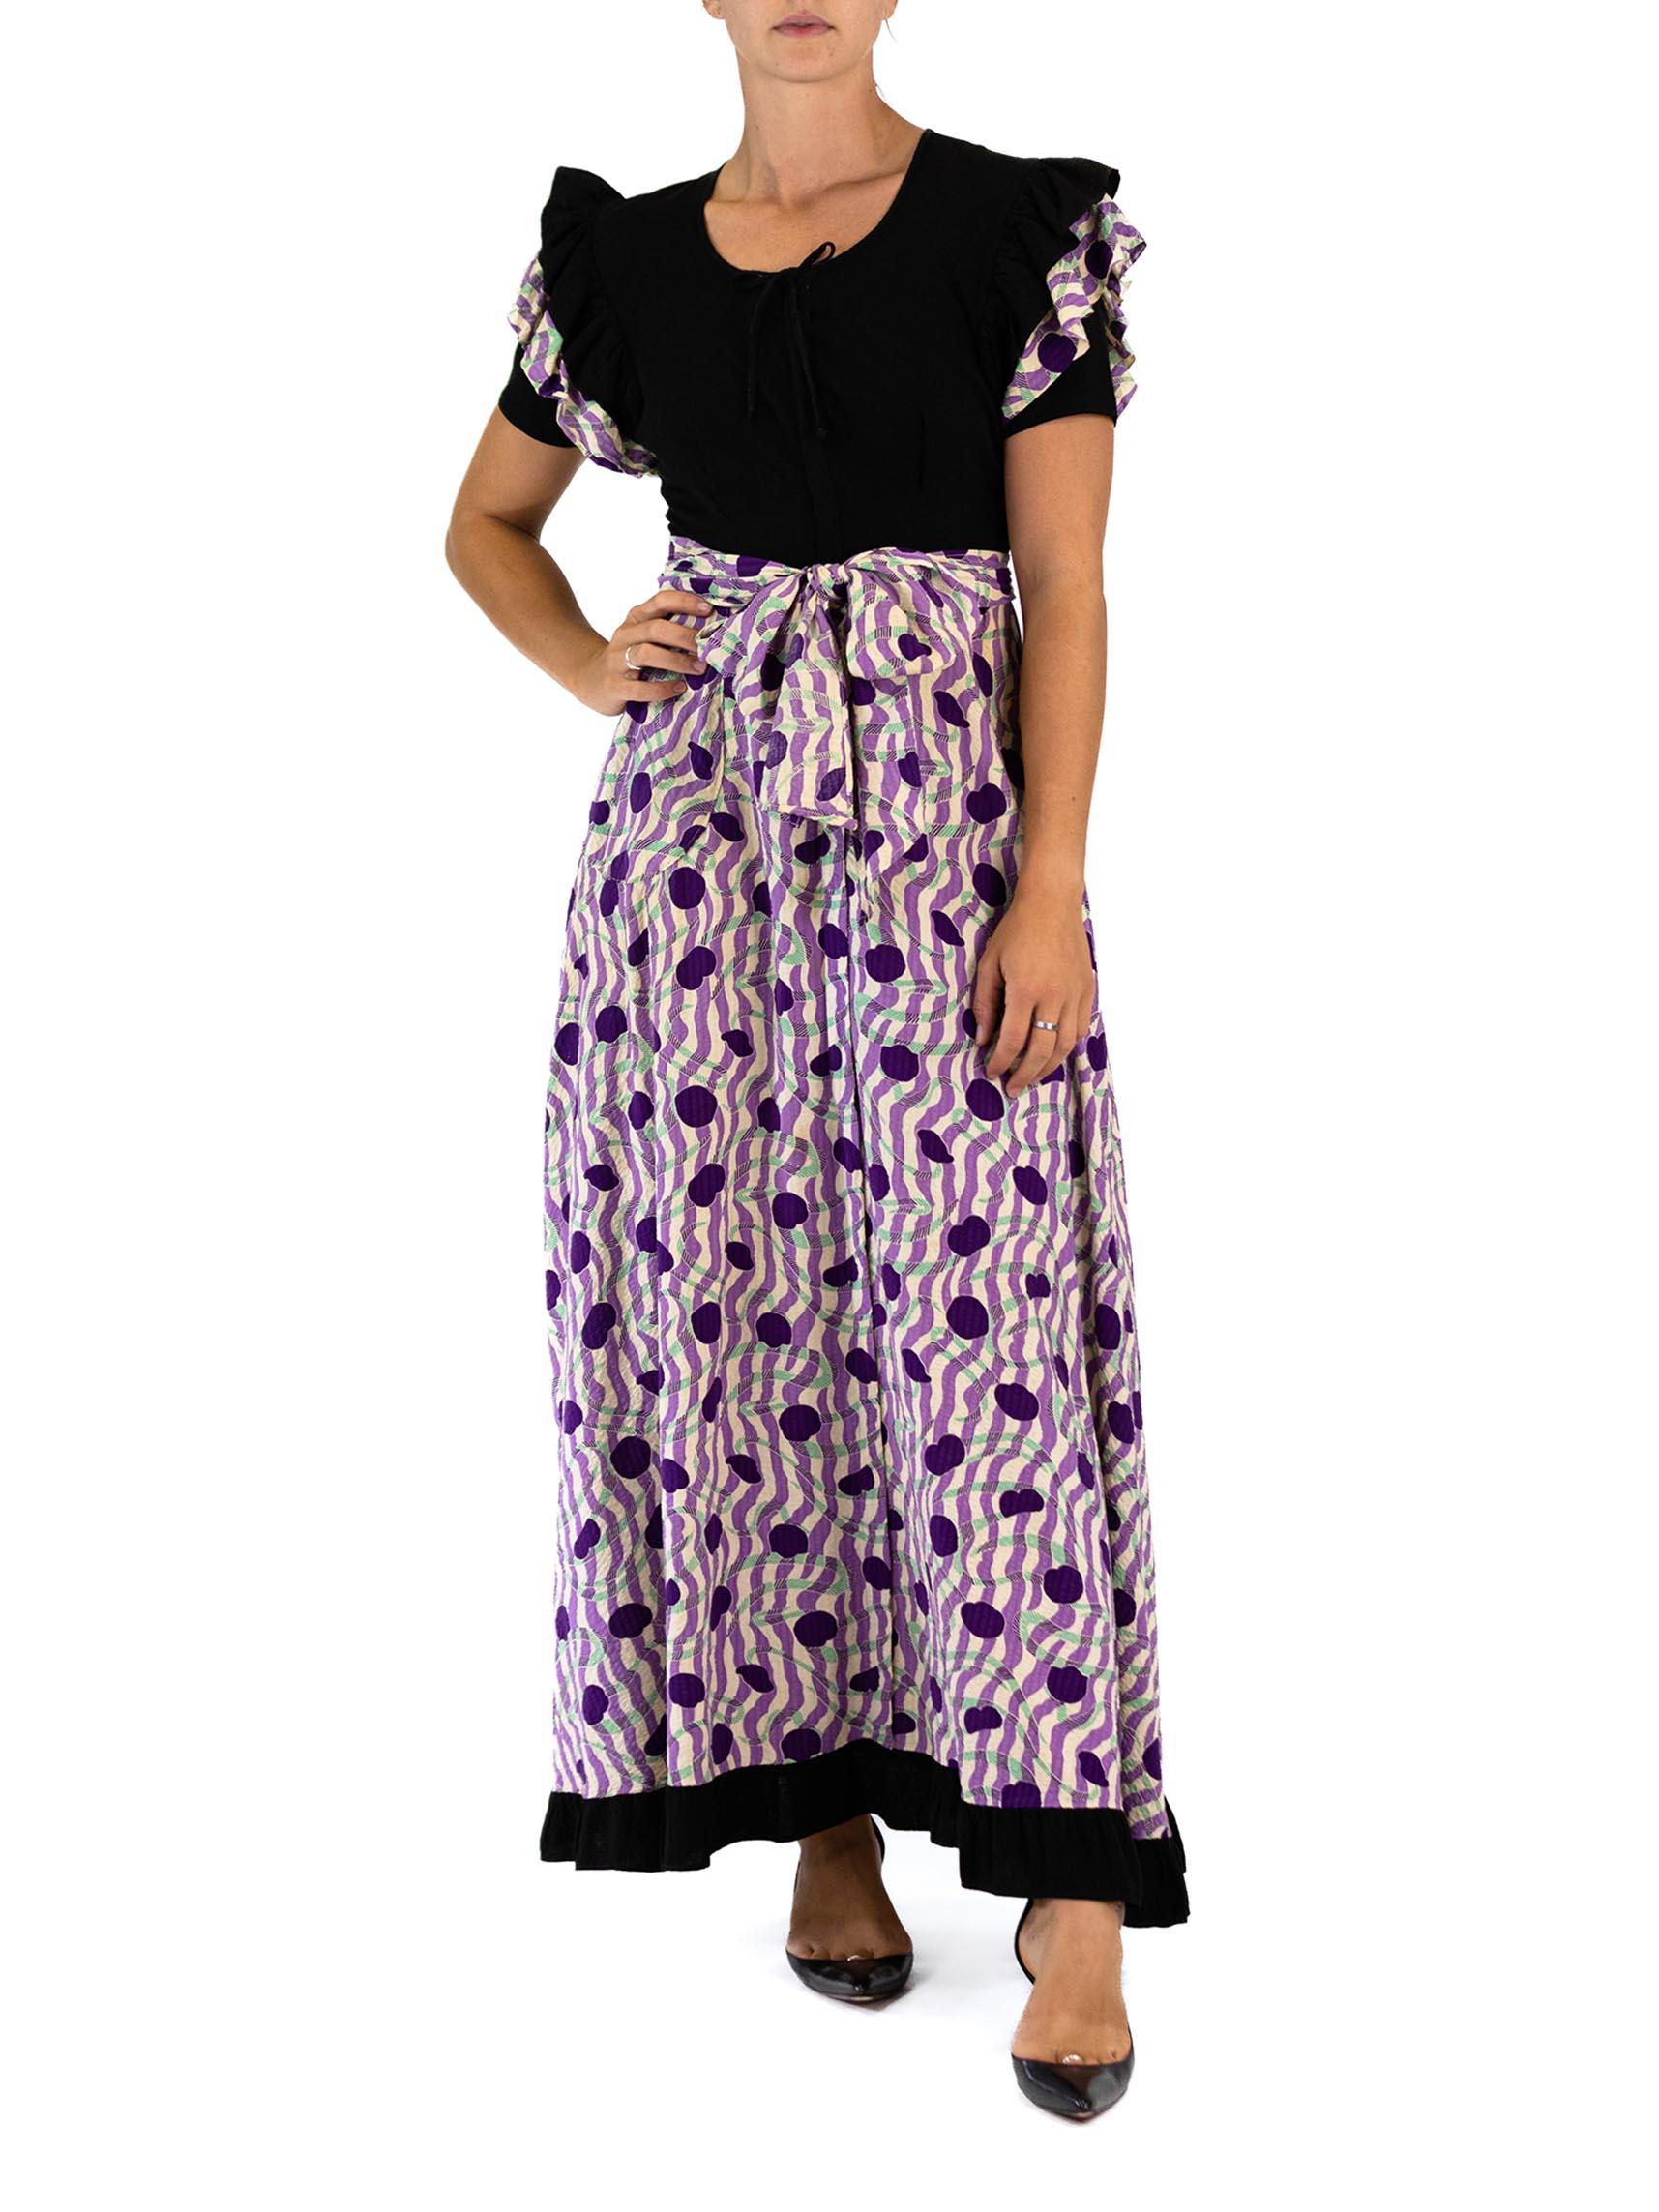 1930S Black & Purple Cotton Ruffle Sleeved “Breakfast Formals” House Dress In Excellent Condition For Sale In New York, NY